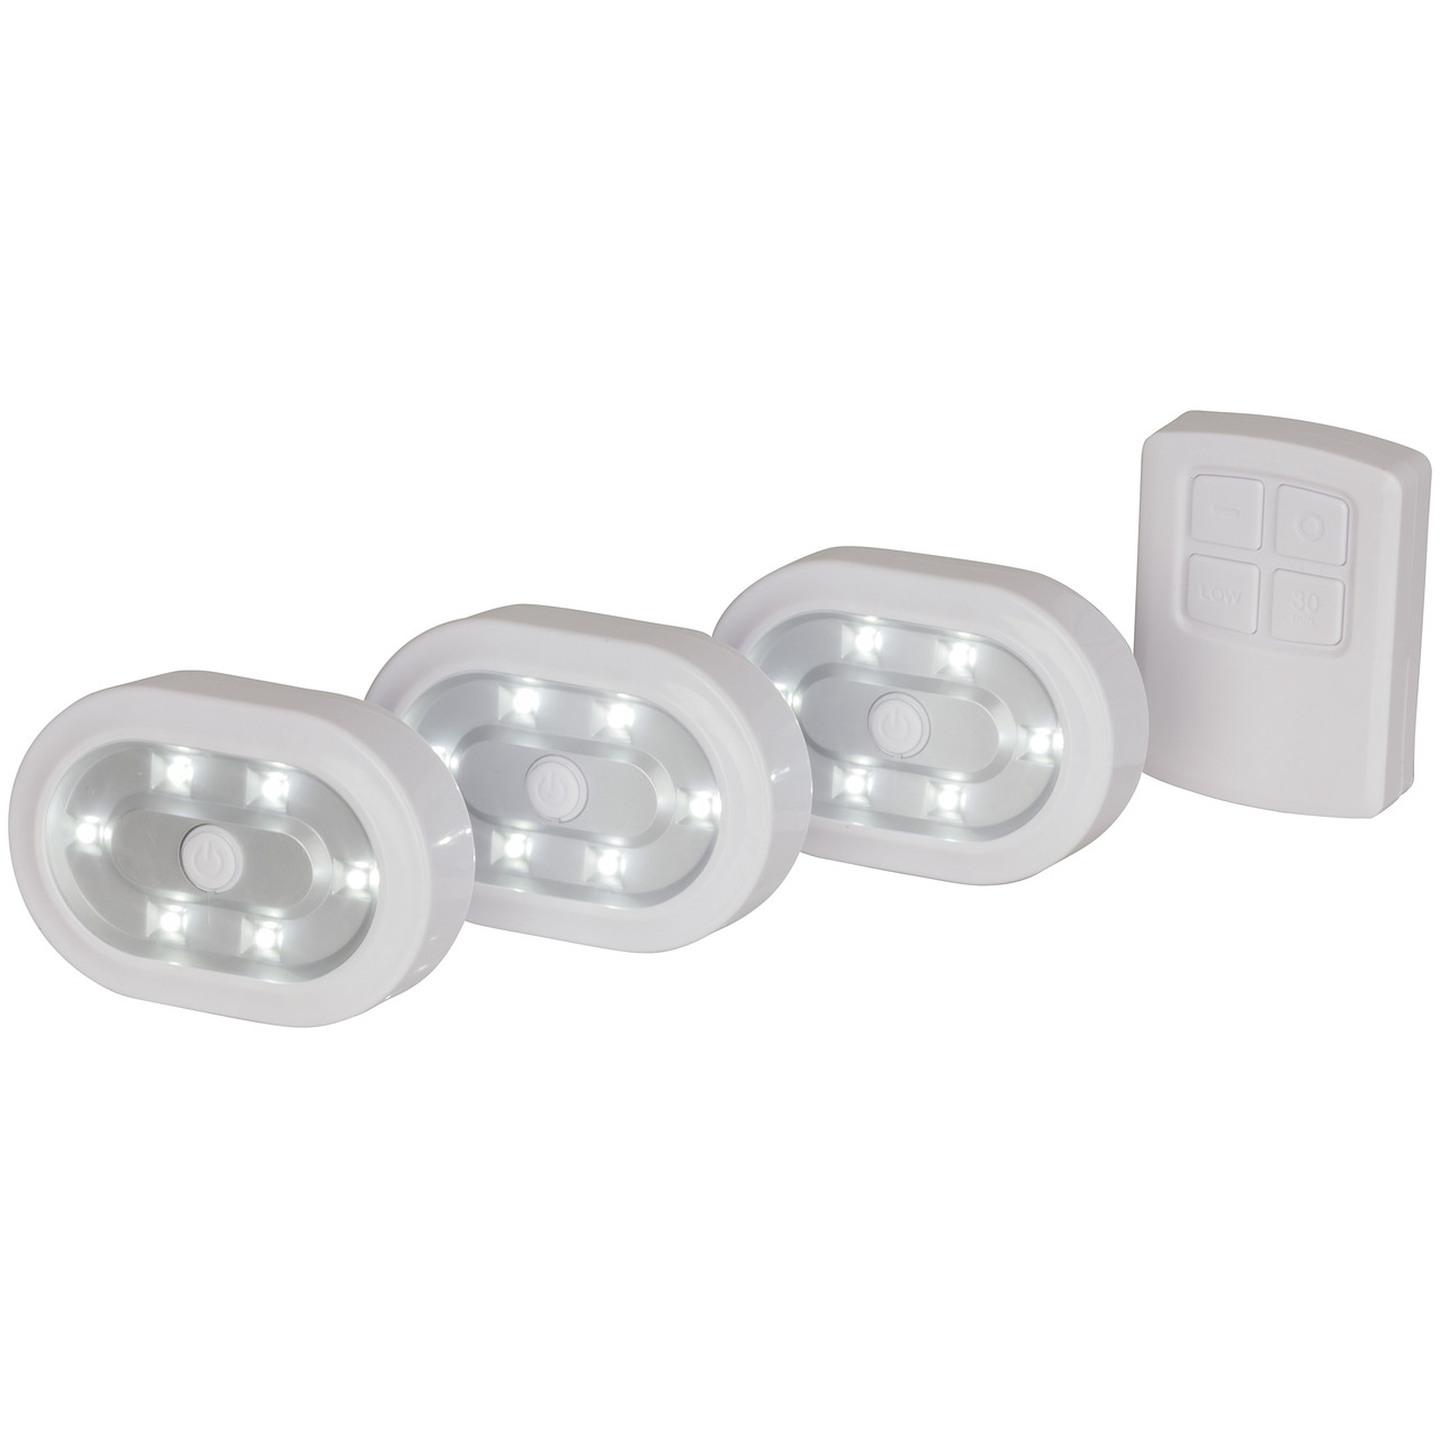 Wireless Remote Control LED Puck Light Kit - with 3 Lights and 1 Remote Control